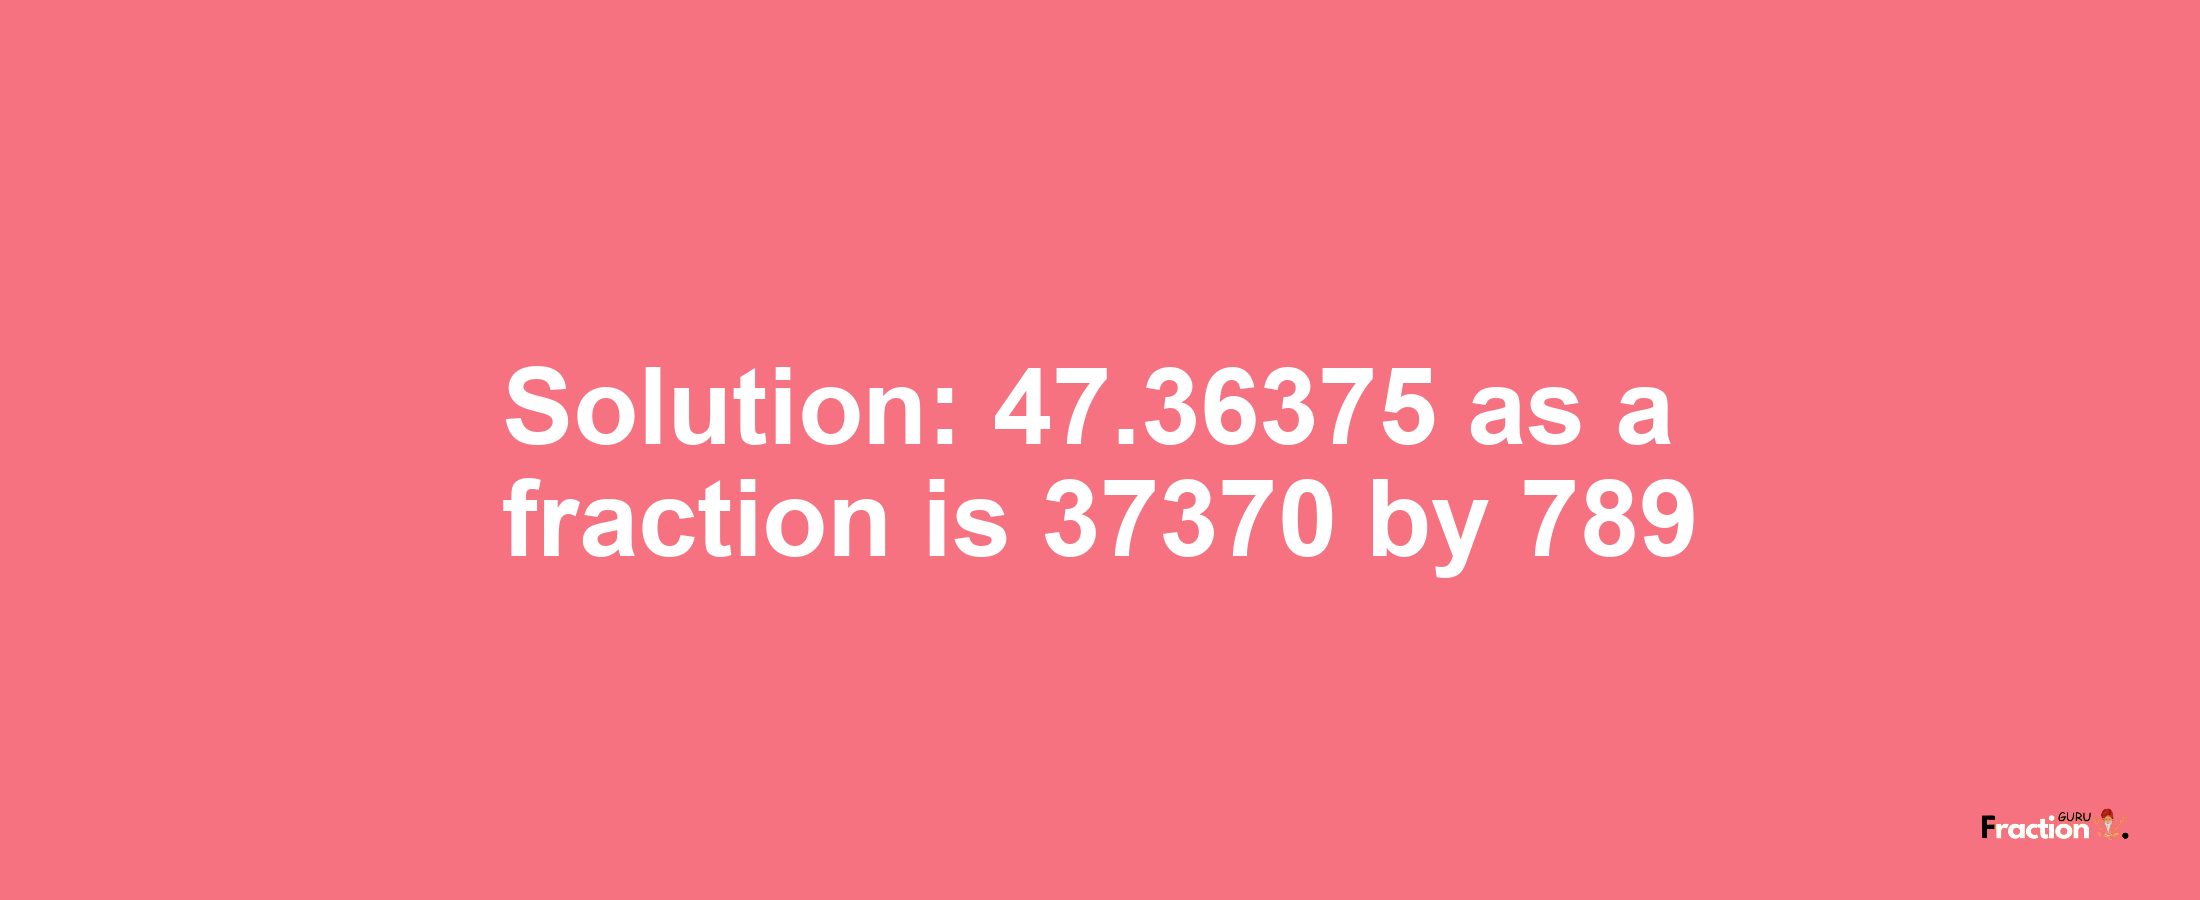 Solution:47.36375 as a fraction is 37370/789